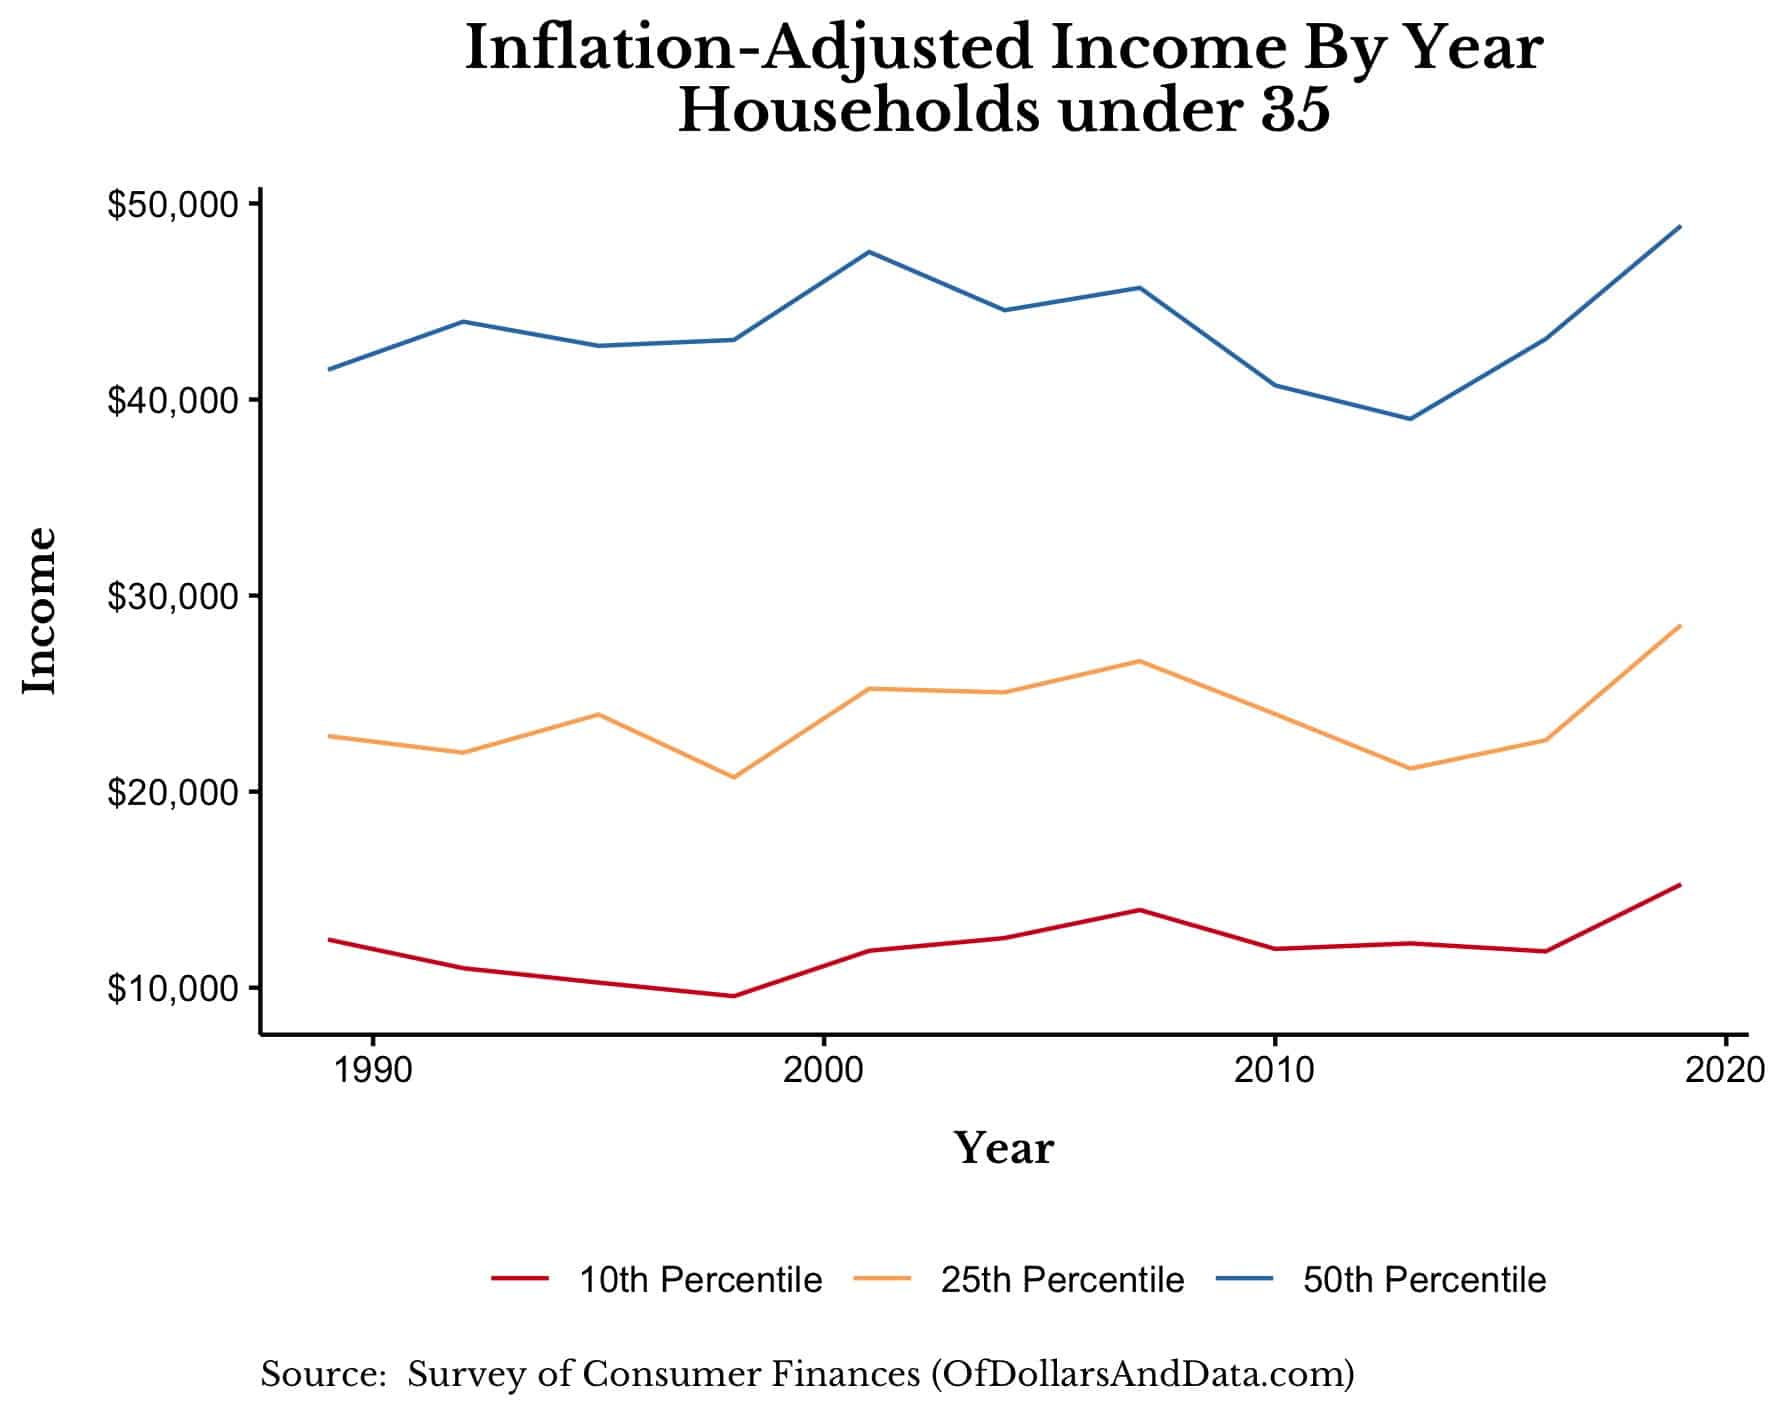 Inflation-adjusted income by year for households under 35 for the 50th, 25th, and 10th percentile